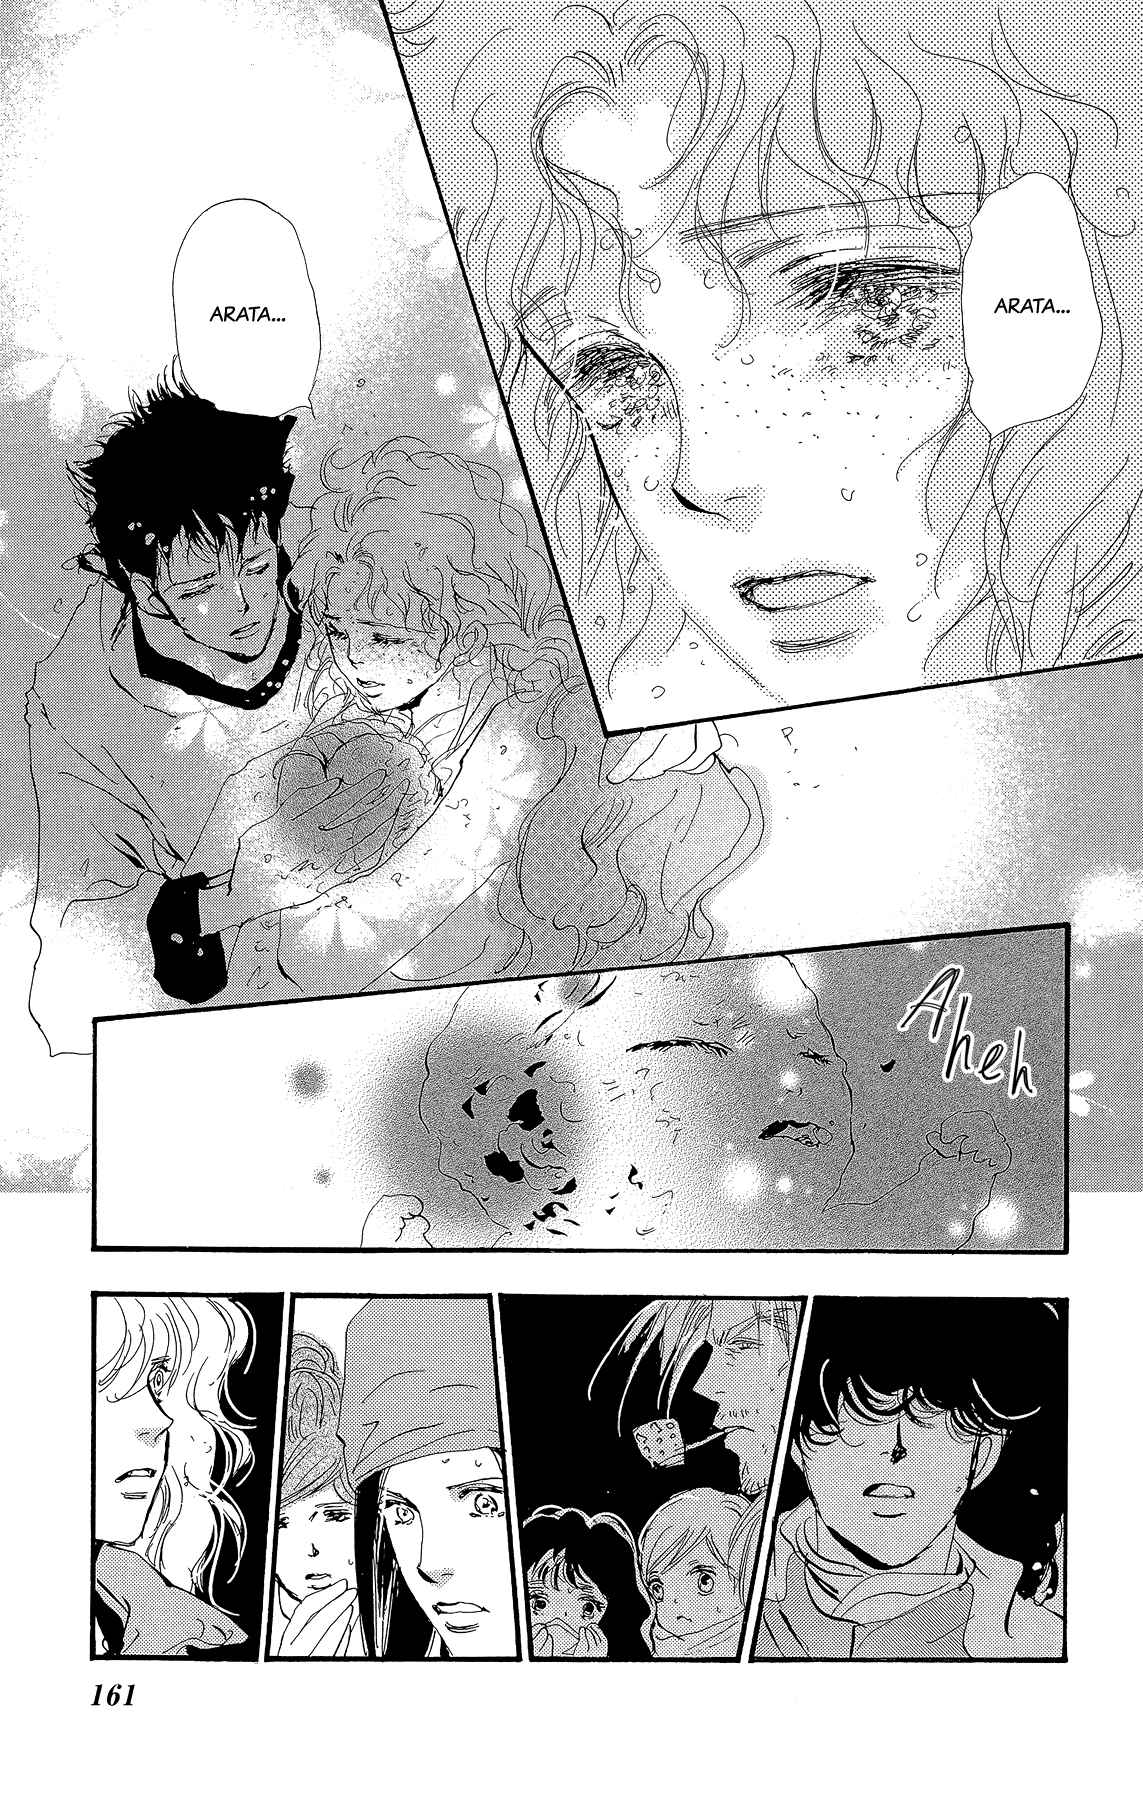 7 Seeds Vol. 34 Ch. 176 Final Chapter 1 [At the Break of Dawn]